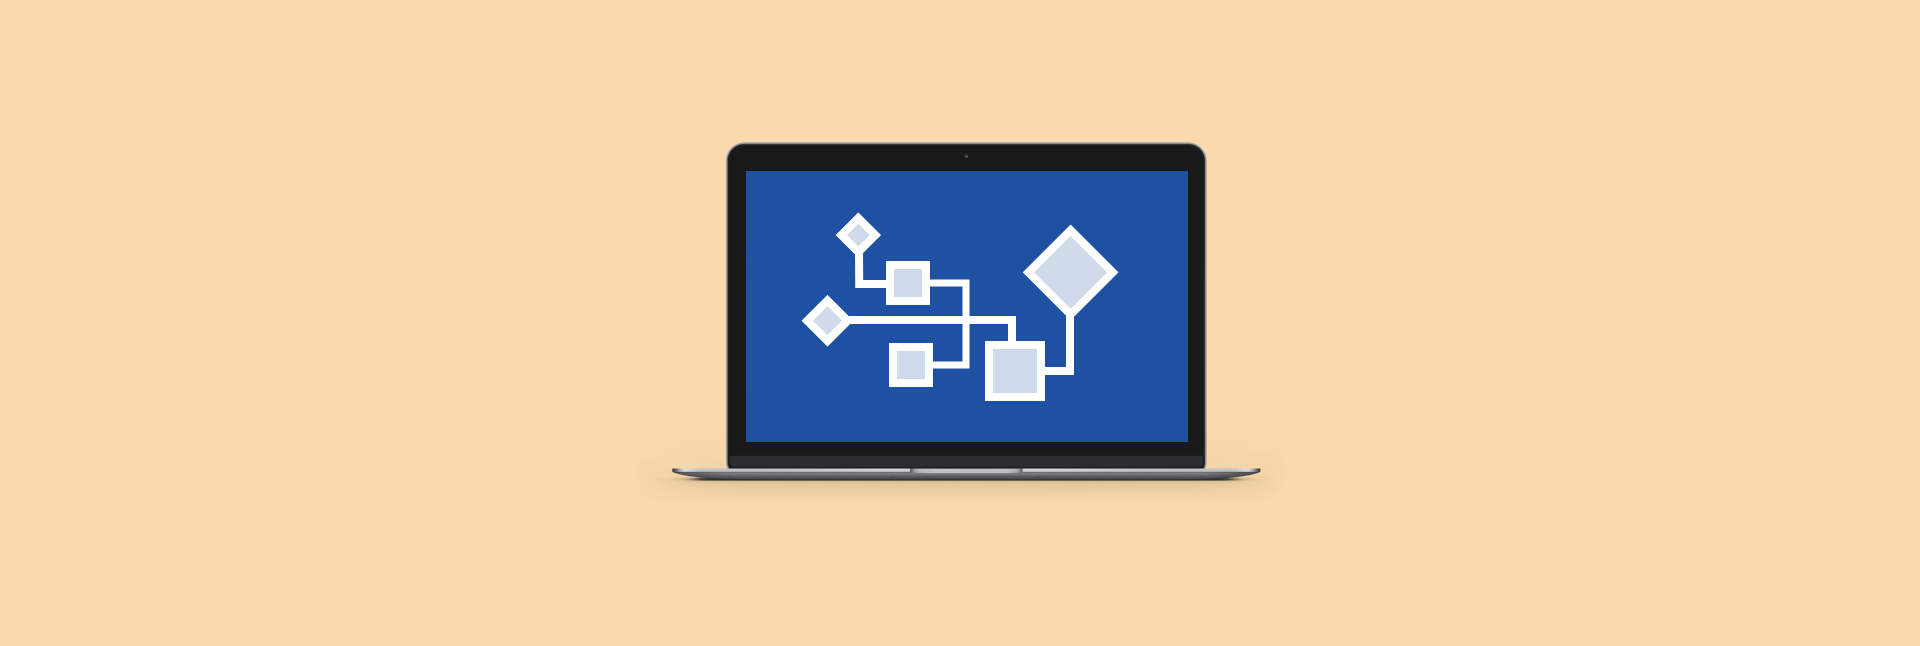 visio compatible software for mac